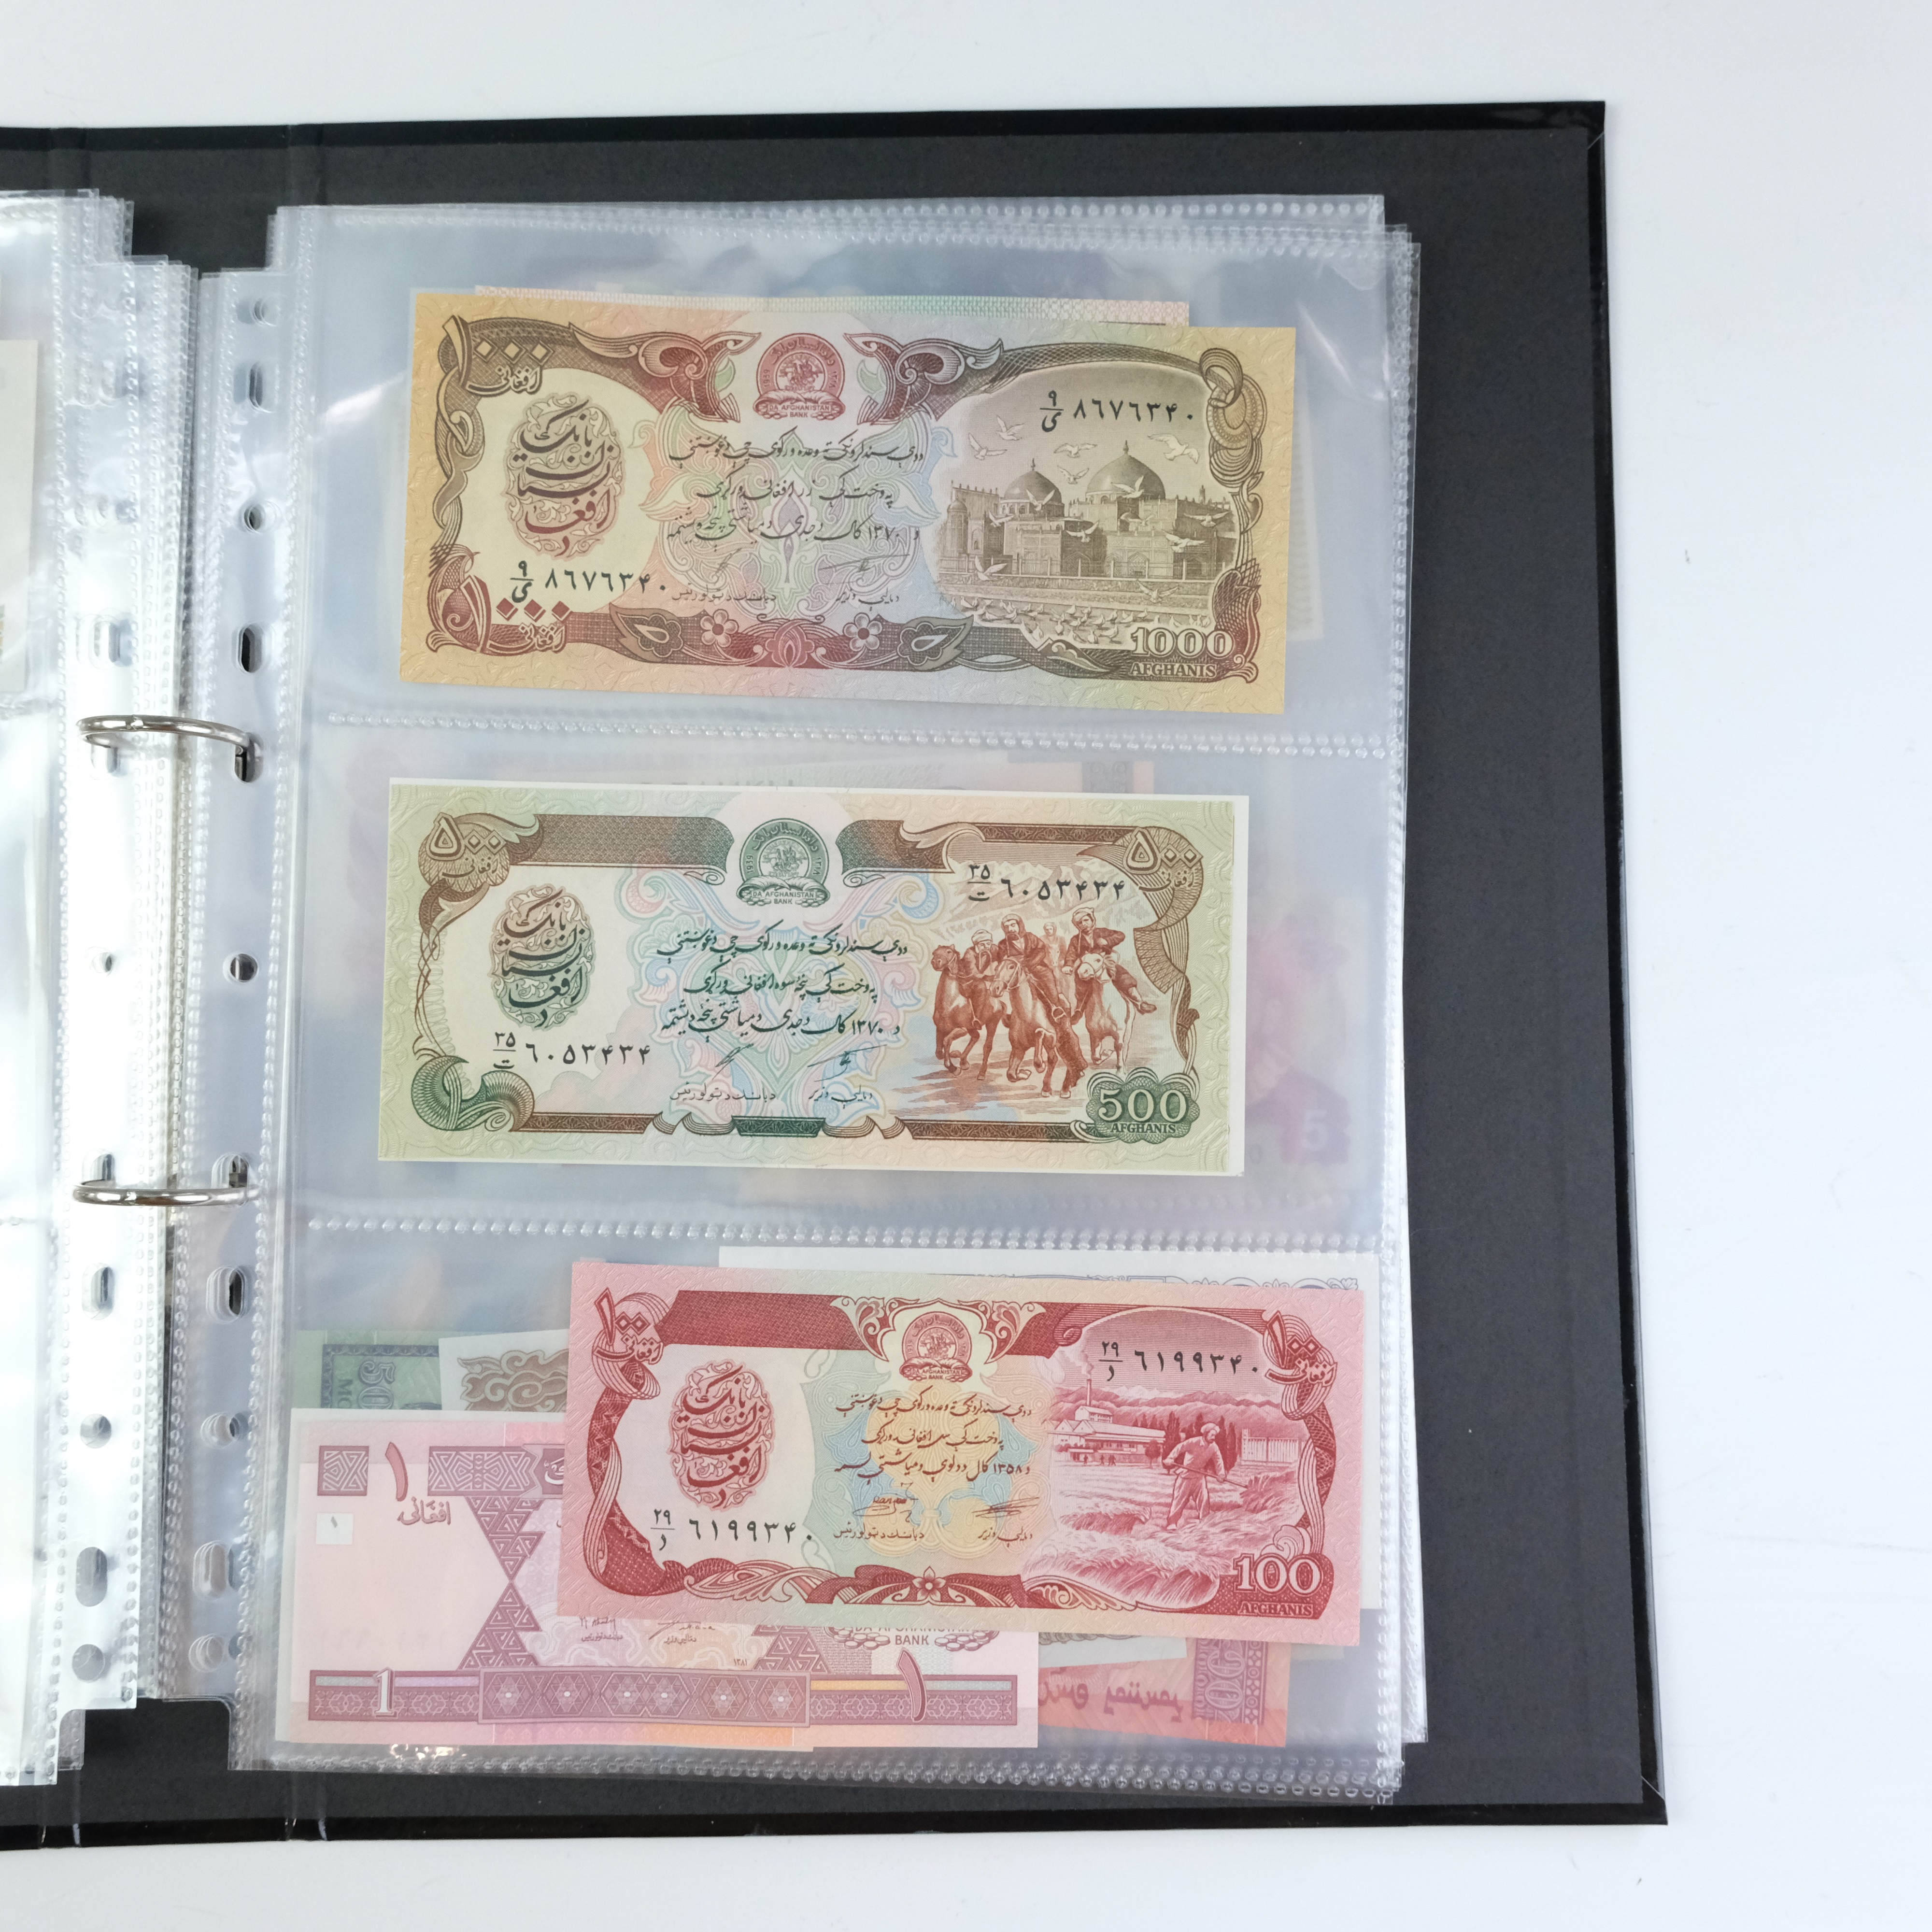 A well-presented album of world banknotes including Indonesia, Yugoslavia, Belarus, Peru, Brazil, - Image 14 of 30